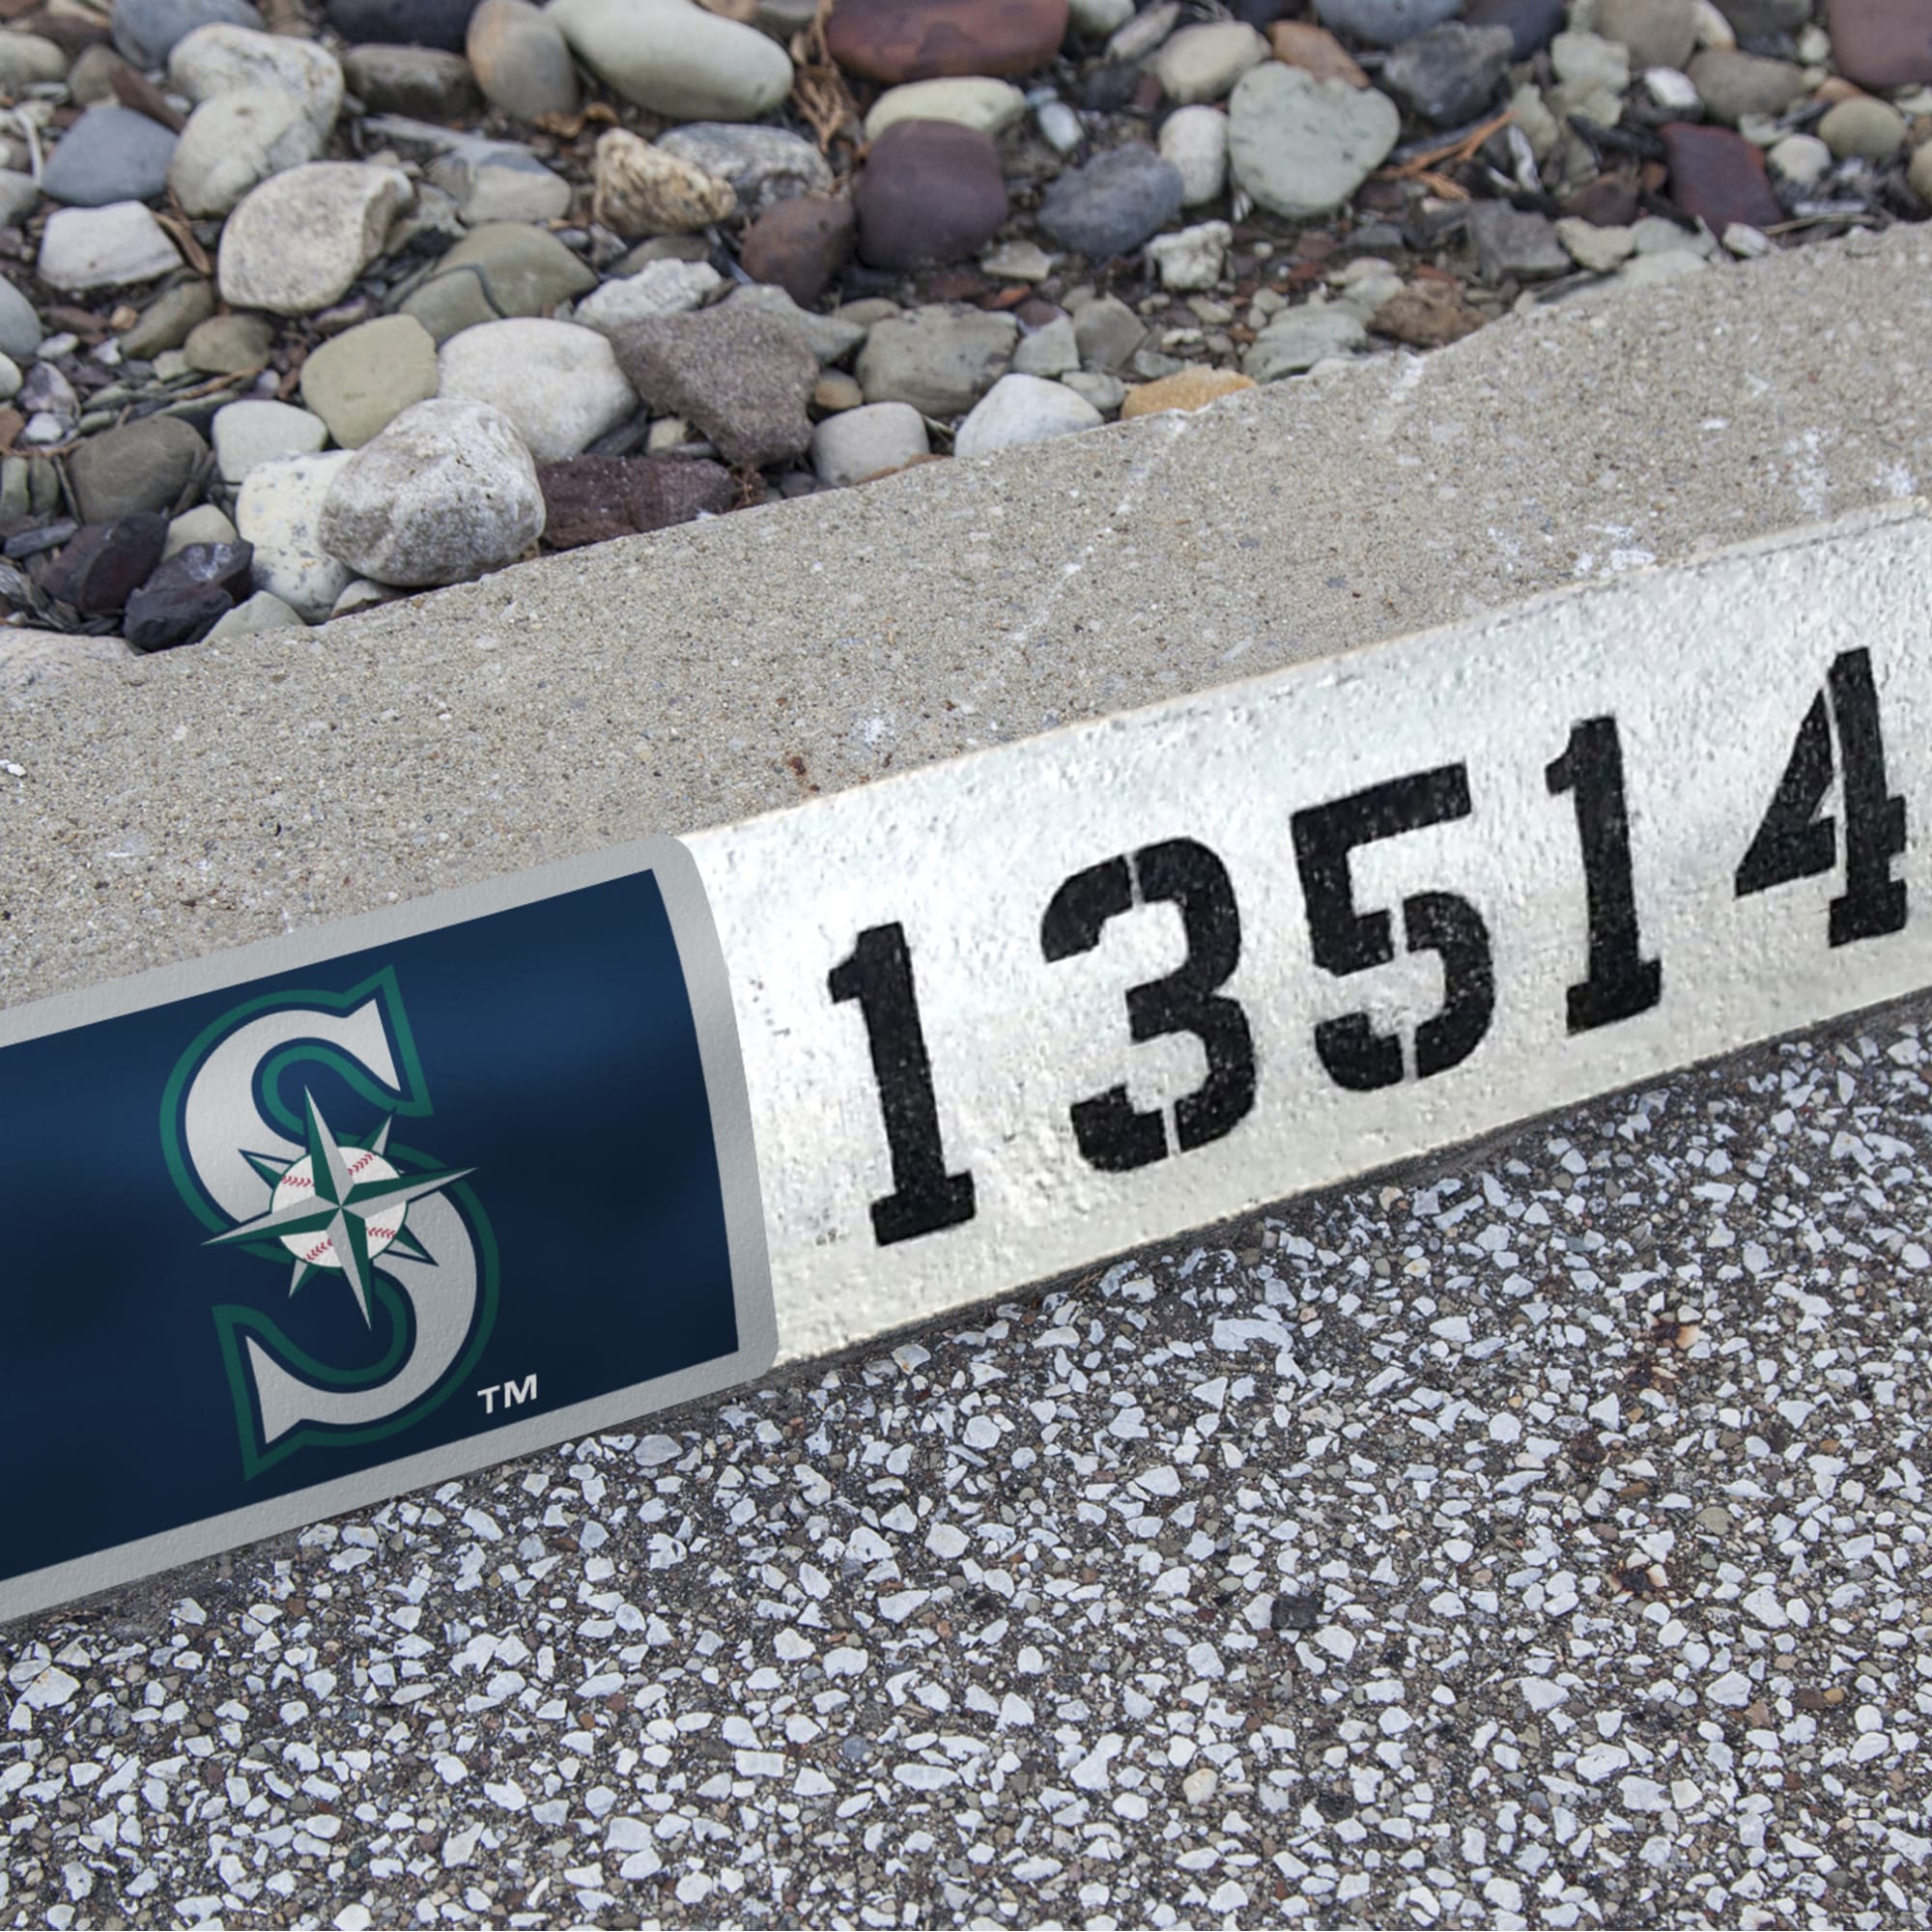 Seattle Mariners: Address Block - Officially Licensed MLB Outdoor Graphic 6.0"W x 8.0"H by Fathead | Wood/Aluminum